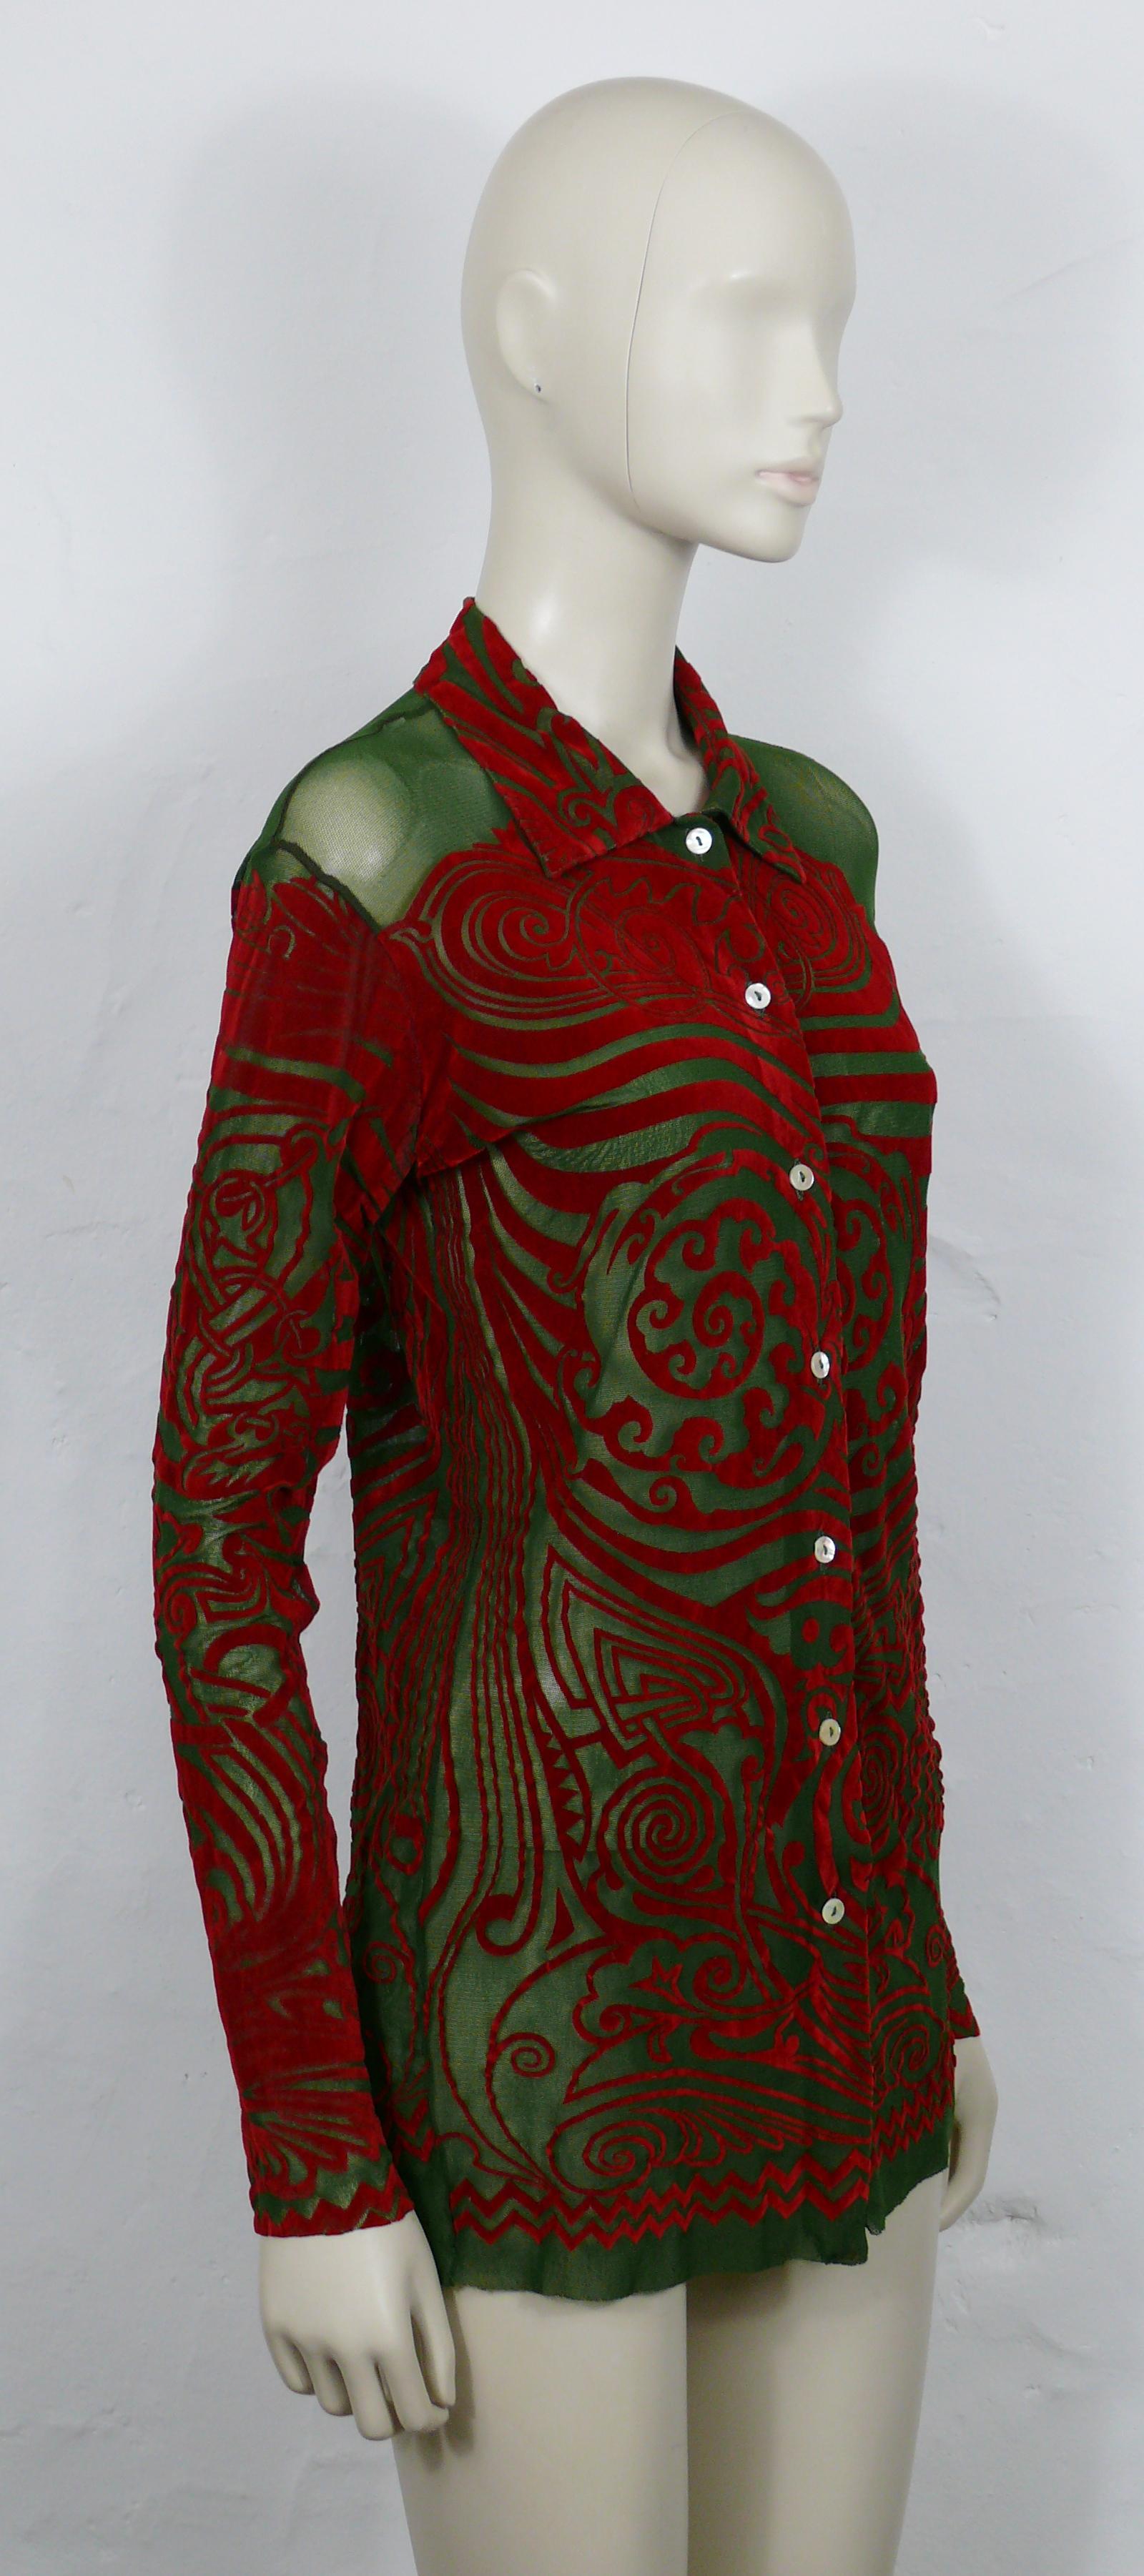 JEAN PAUL GAULTIER vintage 1996 FUZZI green sheer mesh shirt featuring a flocked red tribal tattoo print all-over.

Label reads JEAN PAUL GAULTIER MAILLE.
Made in Italy.

Size label reads : L.
Please refer to measurements.

Composition tag reads :